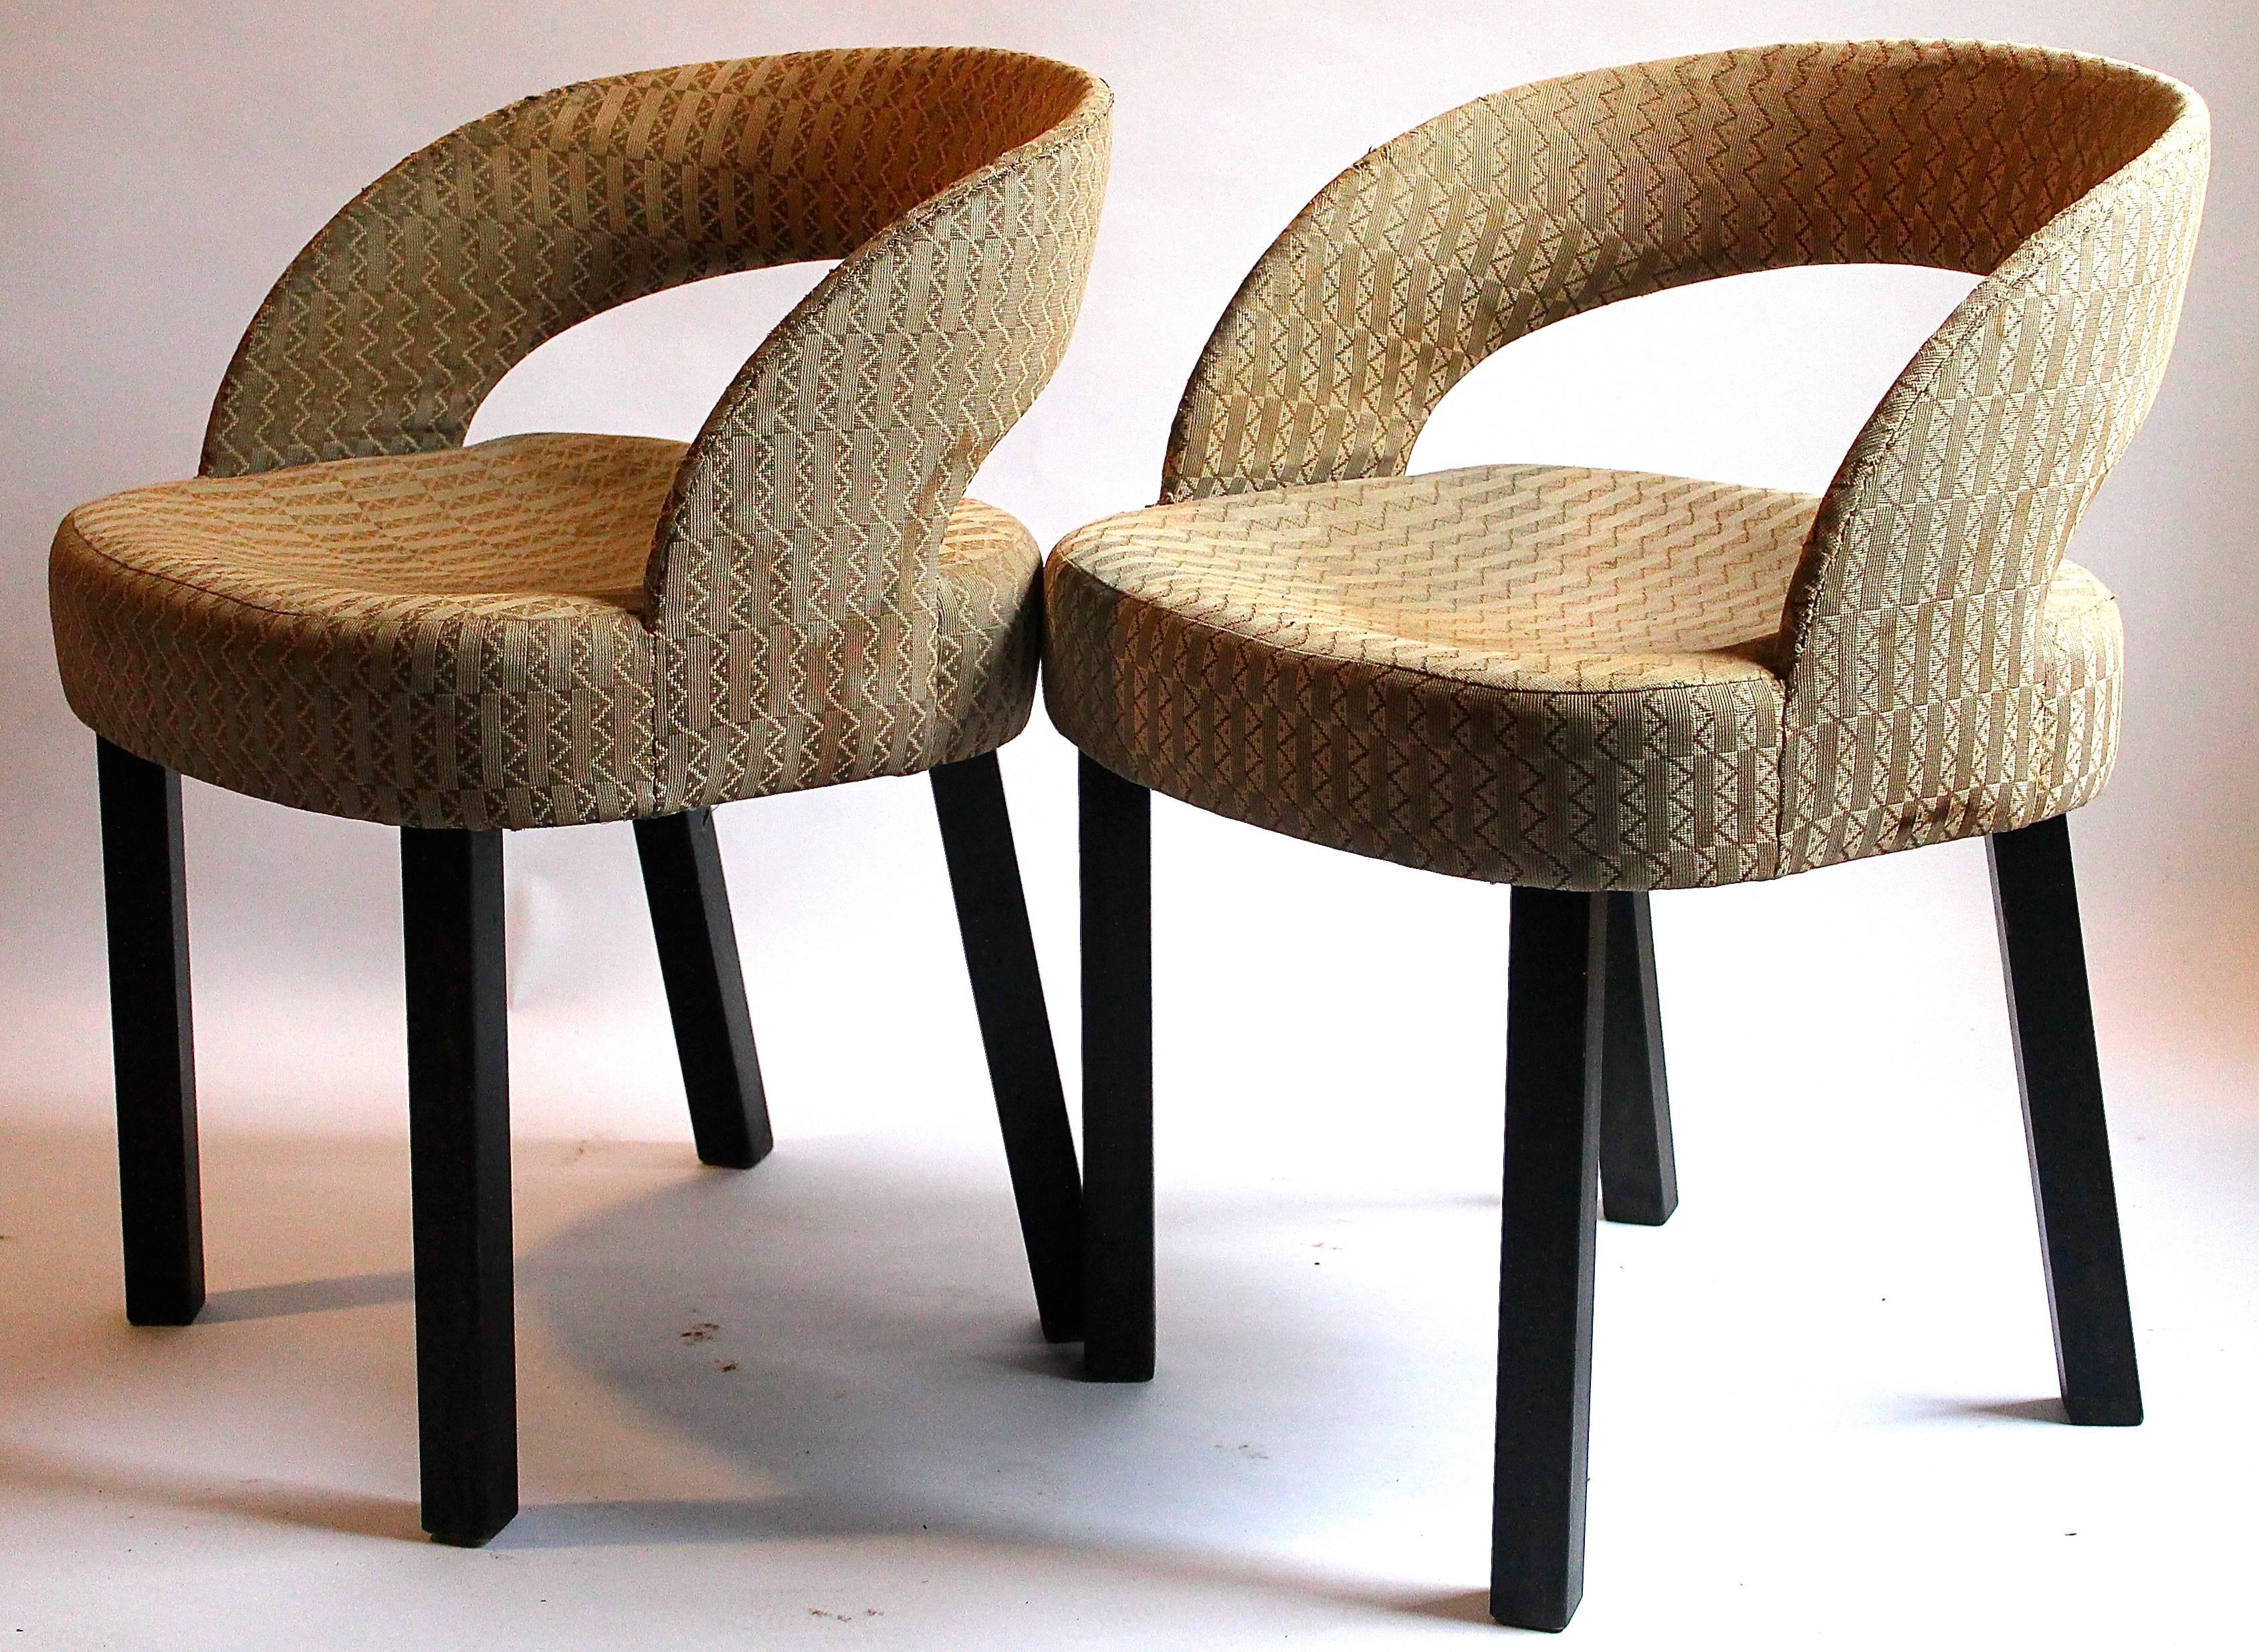 Extremely rare pair of Wiener Werkstätte upholstered chairs. In the original Wiener Werkstatte fabric. All designed by Josef Hoffmann. Original condition-museum quality pieces. Provenance: Walter P. Chrysler.